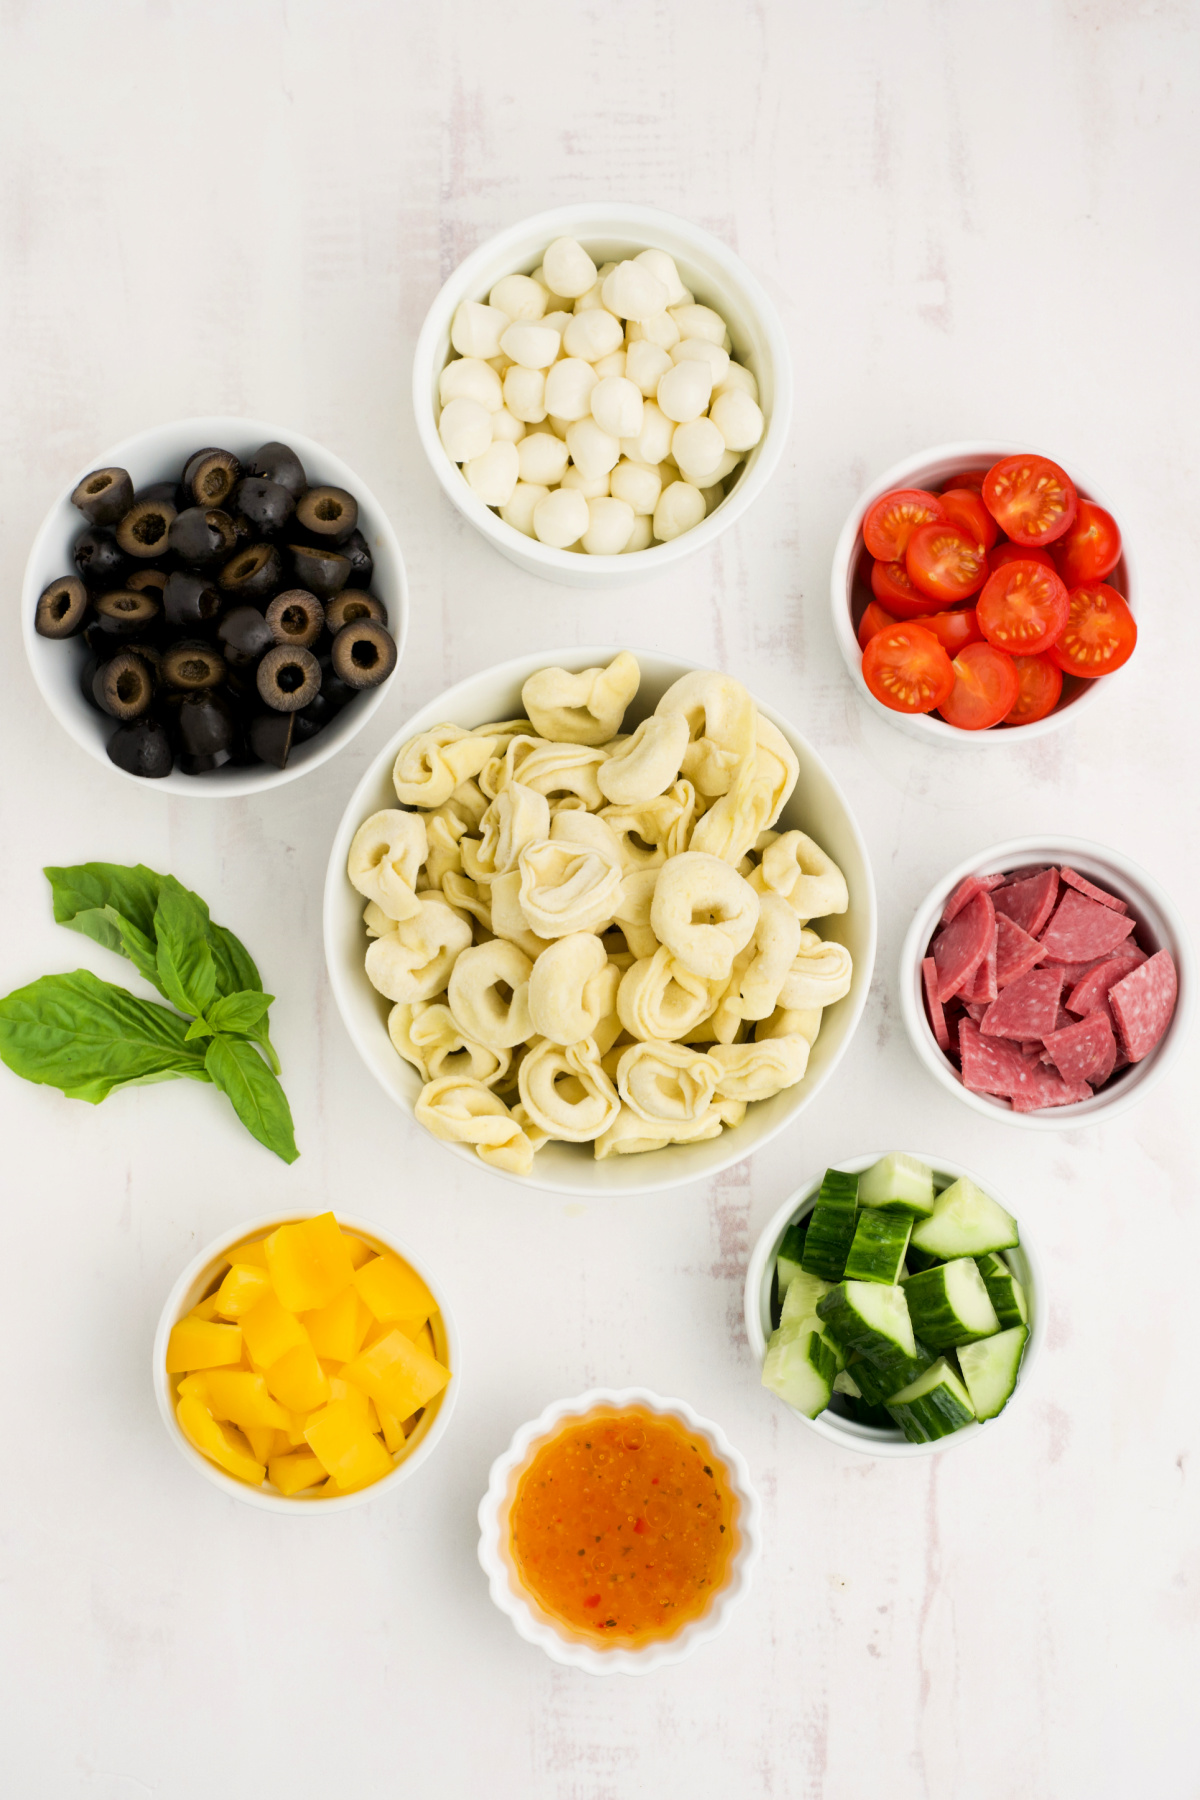 Ingredients to make Tortellini Pasta salad with cucumbers, tomatoes, peppers, cheese and olives